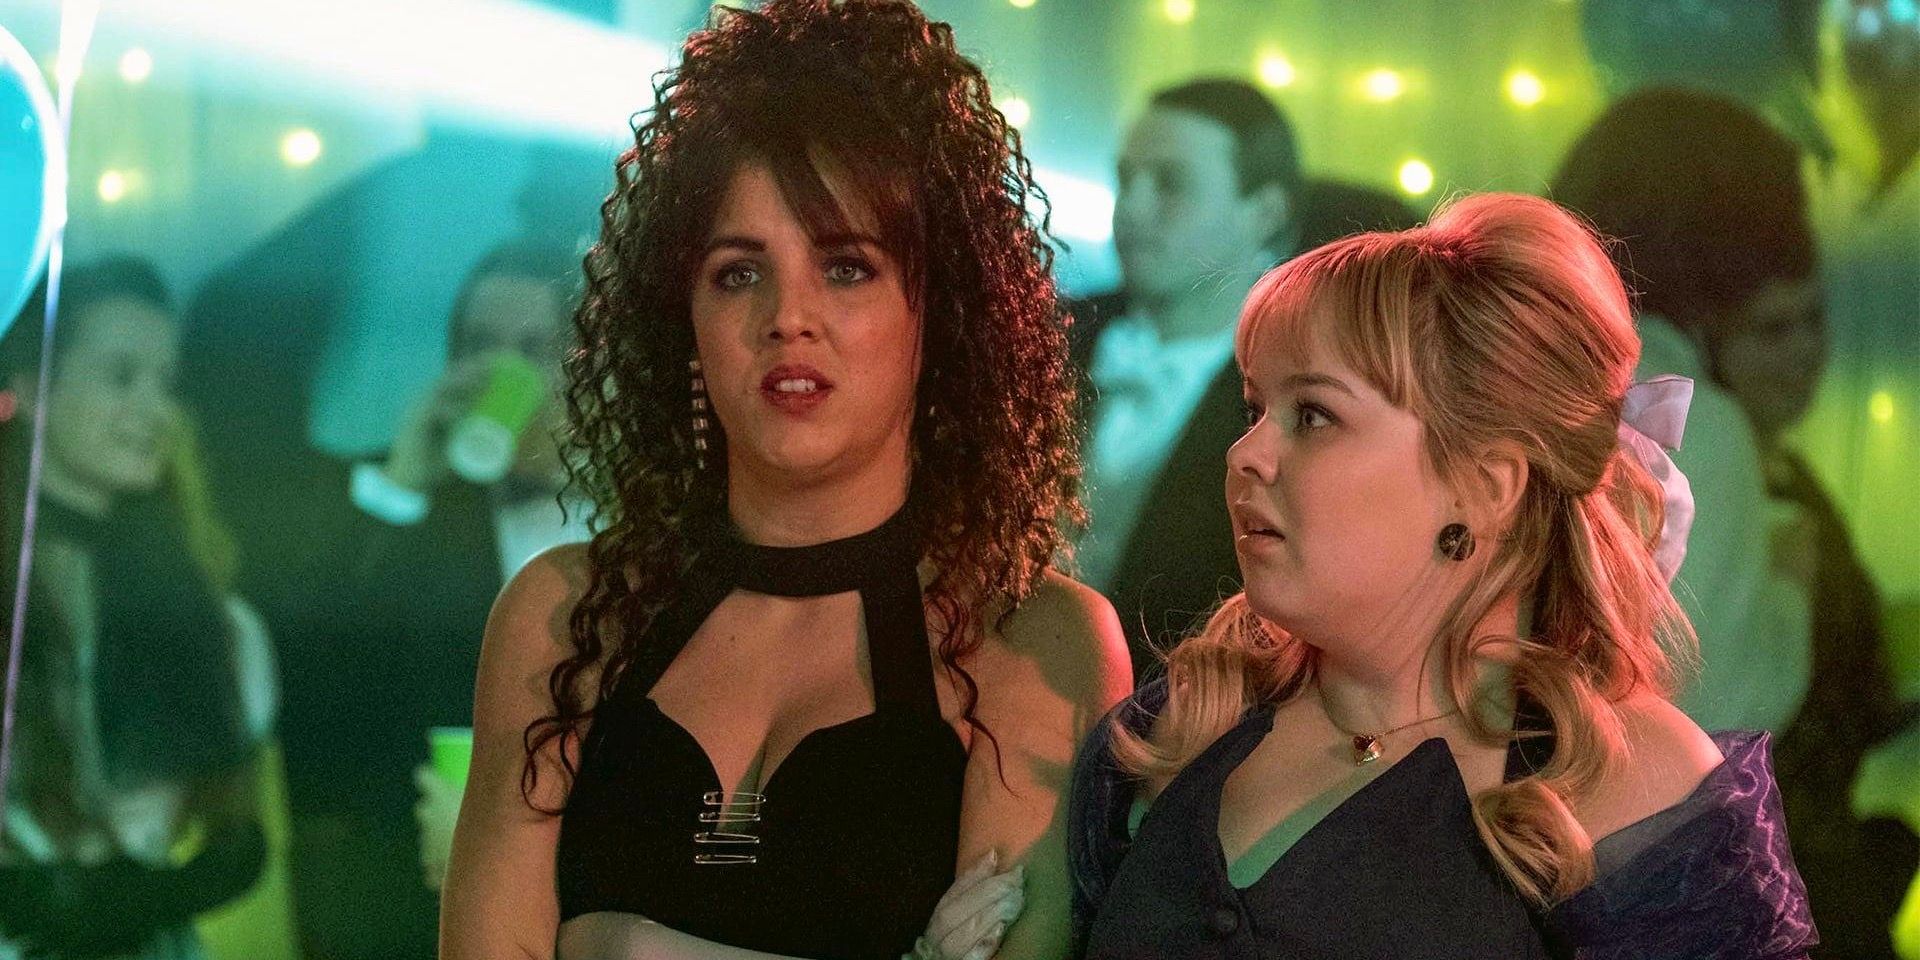 Michelle and Clare at the Prom in Derry Girls